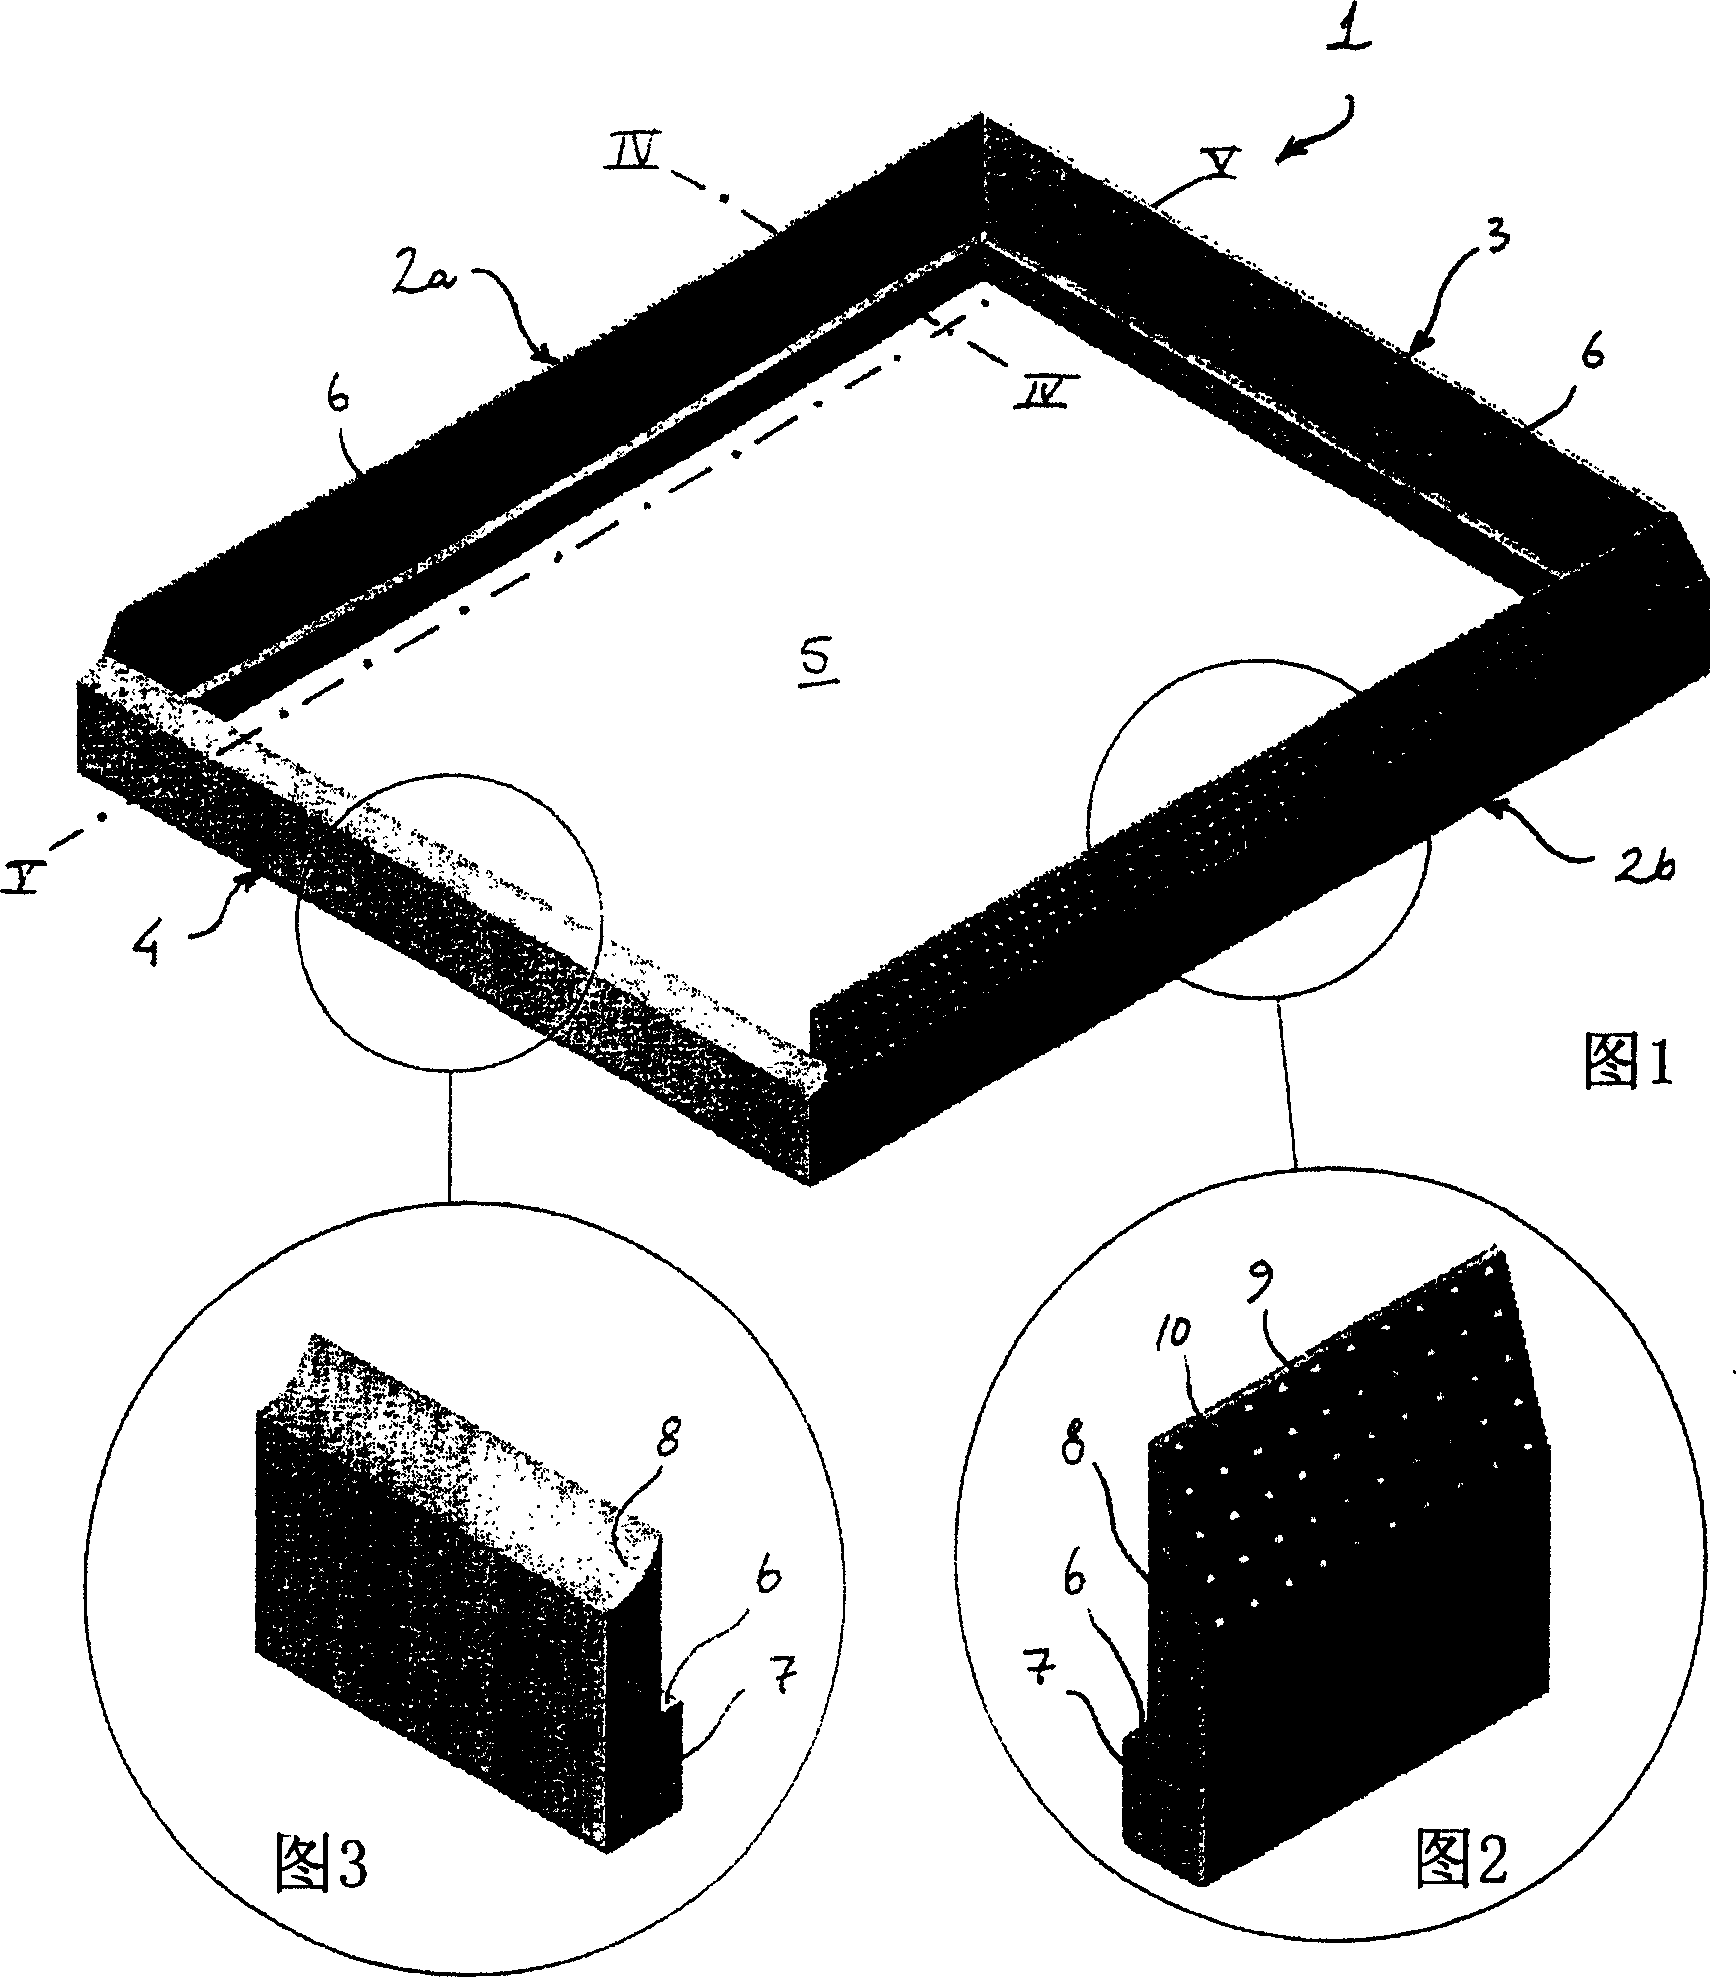 An insulating frame for a roof window